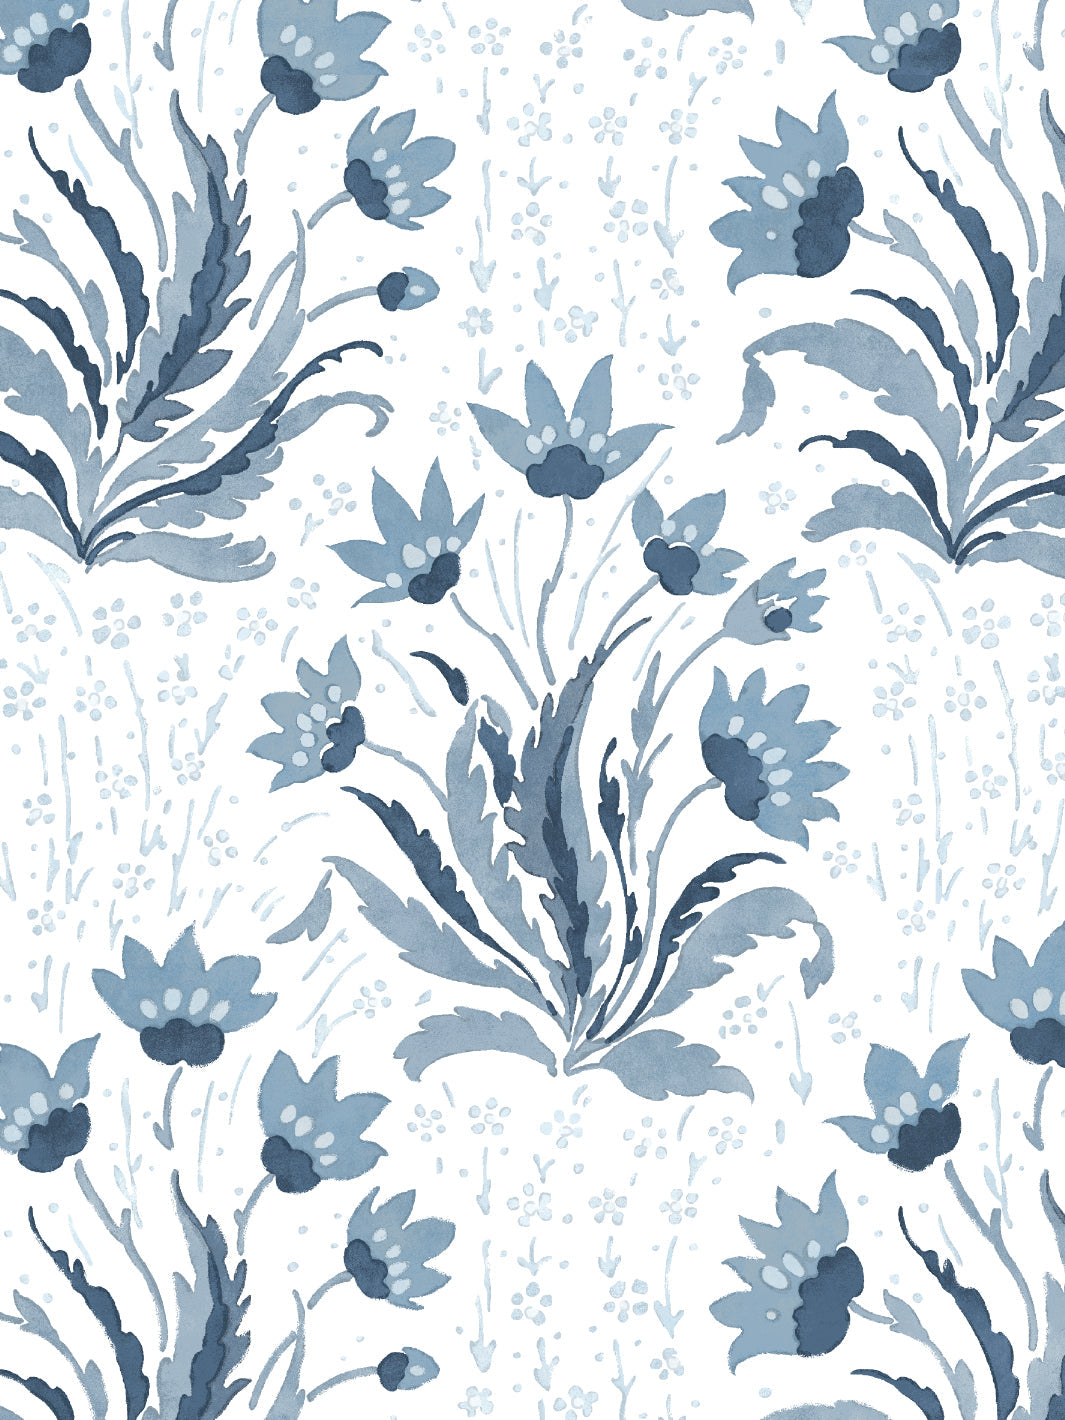 'Hillhouse Floral Tonal' Wallpaper by Nathan Turner - Blue